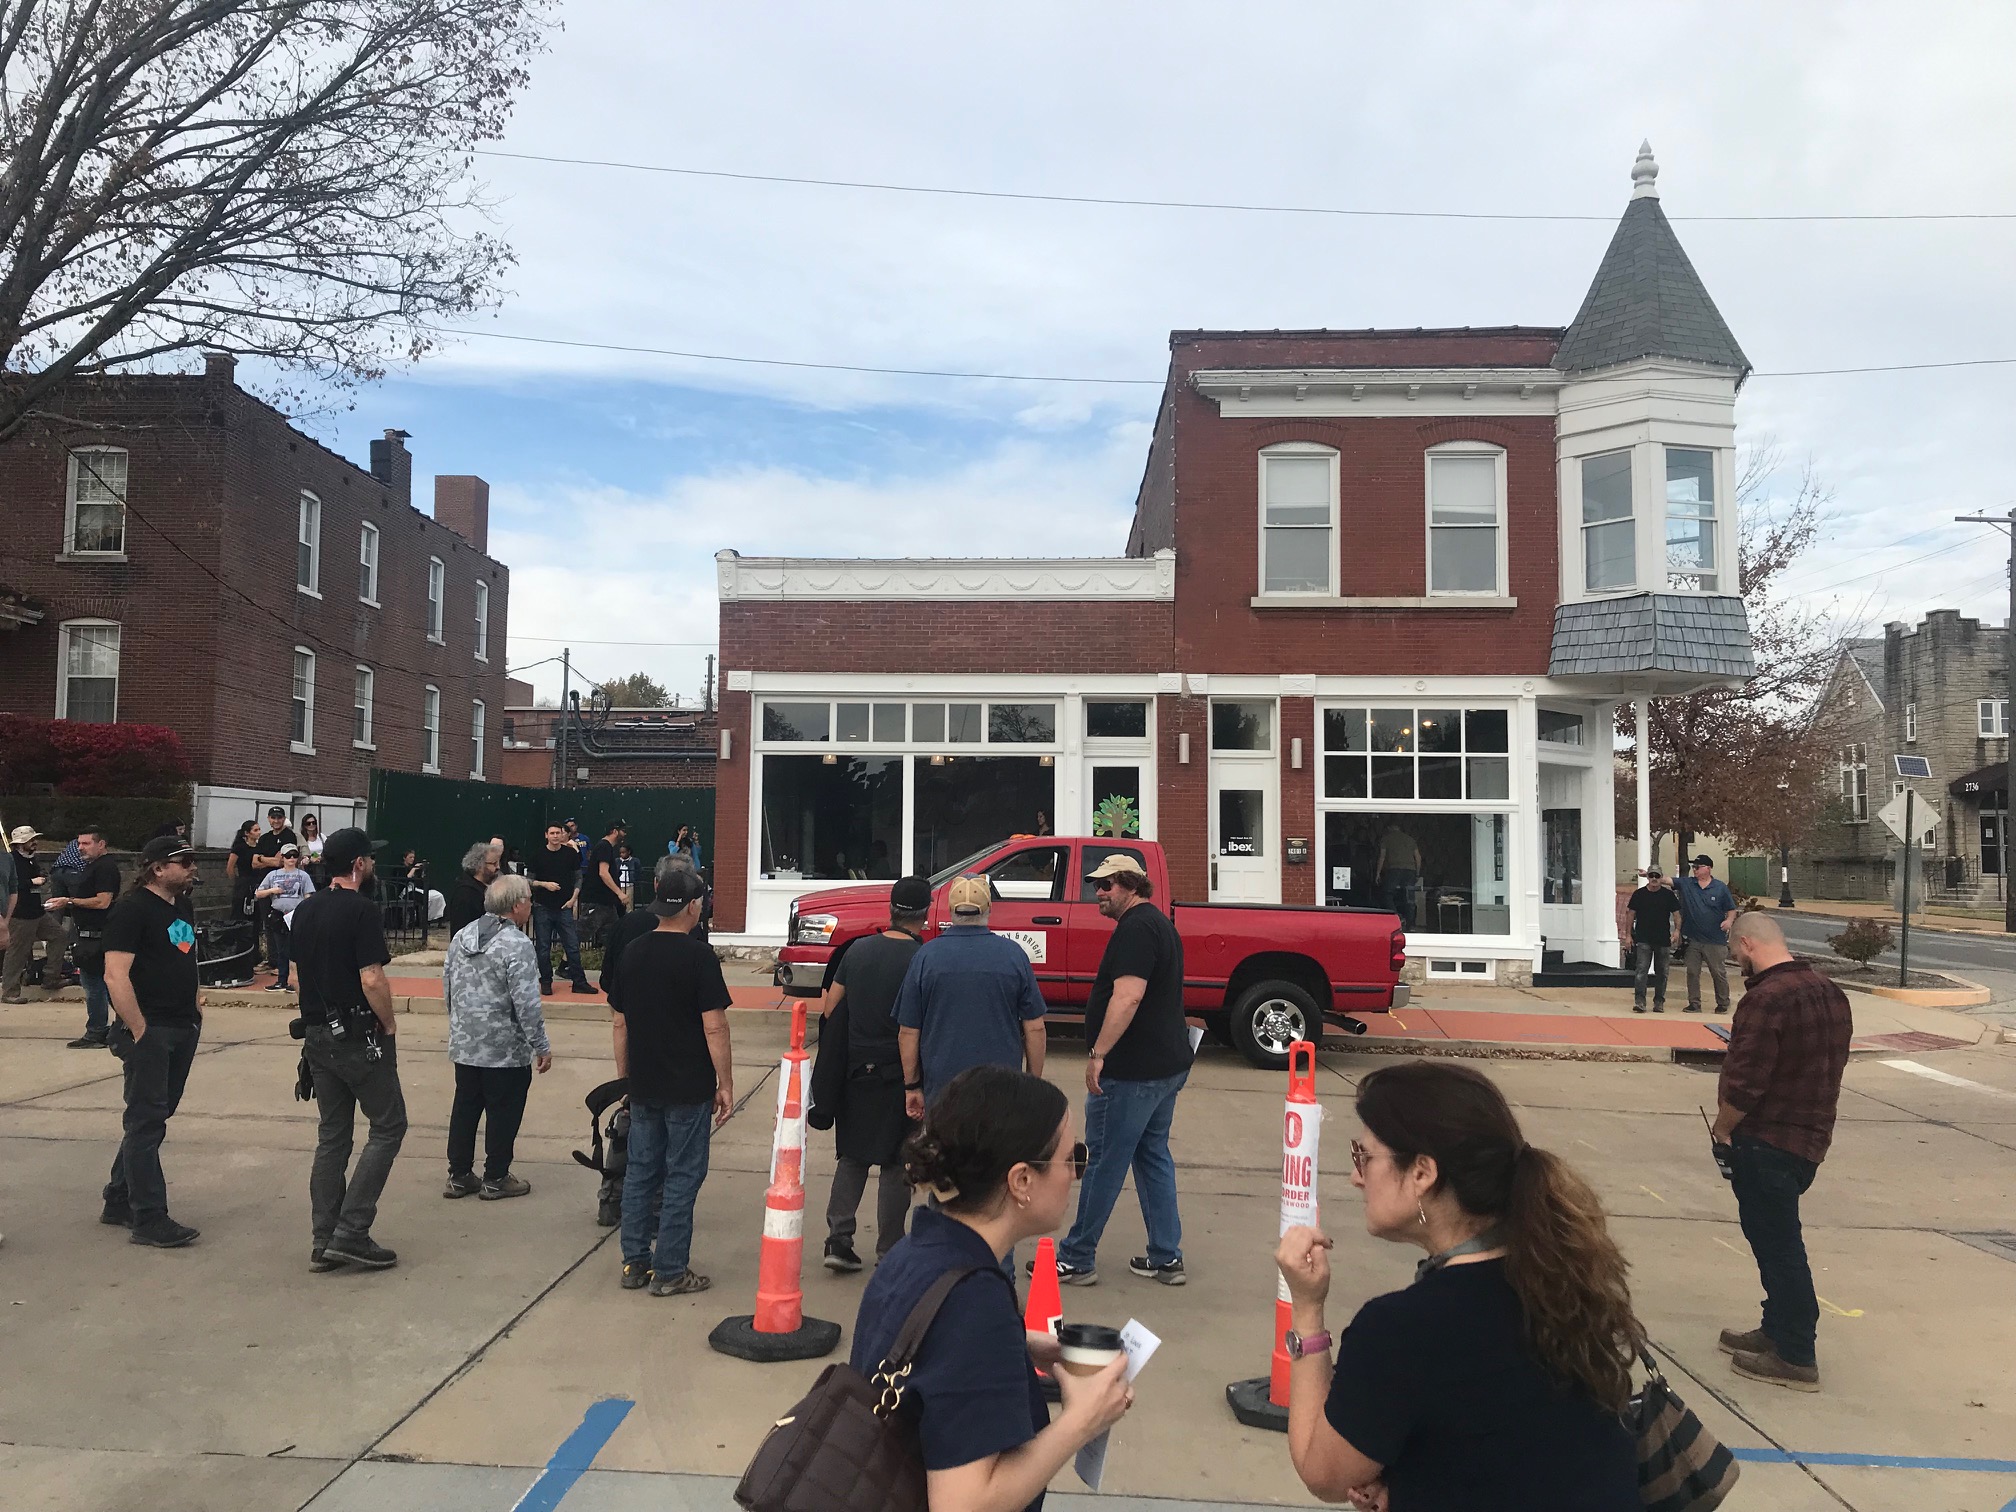 Movie production takes place on the streets of Maplewood